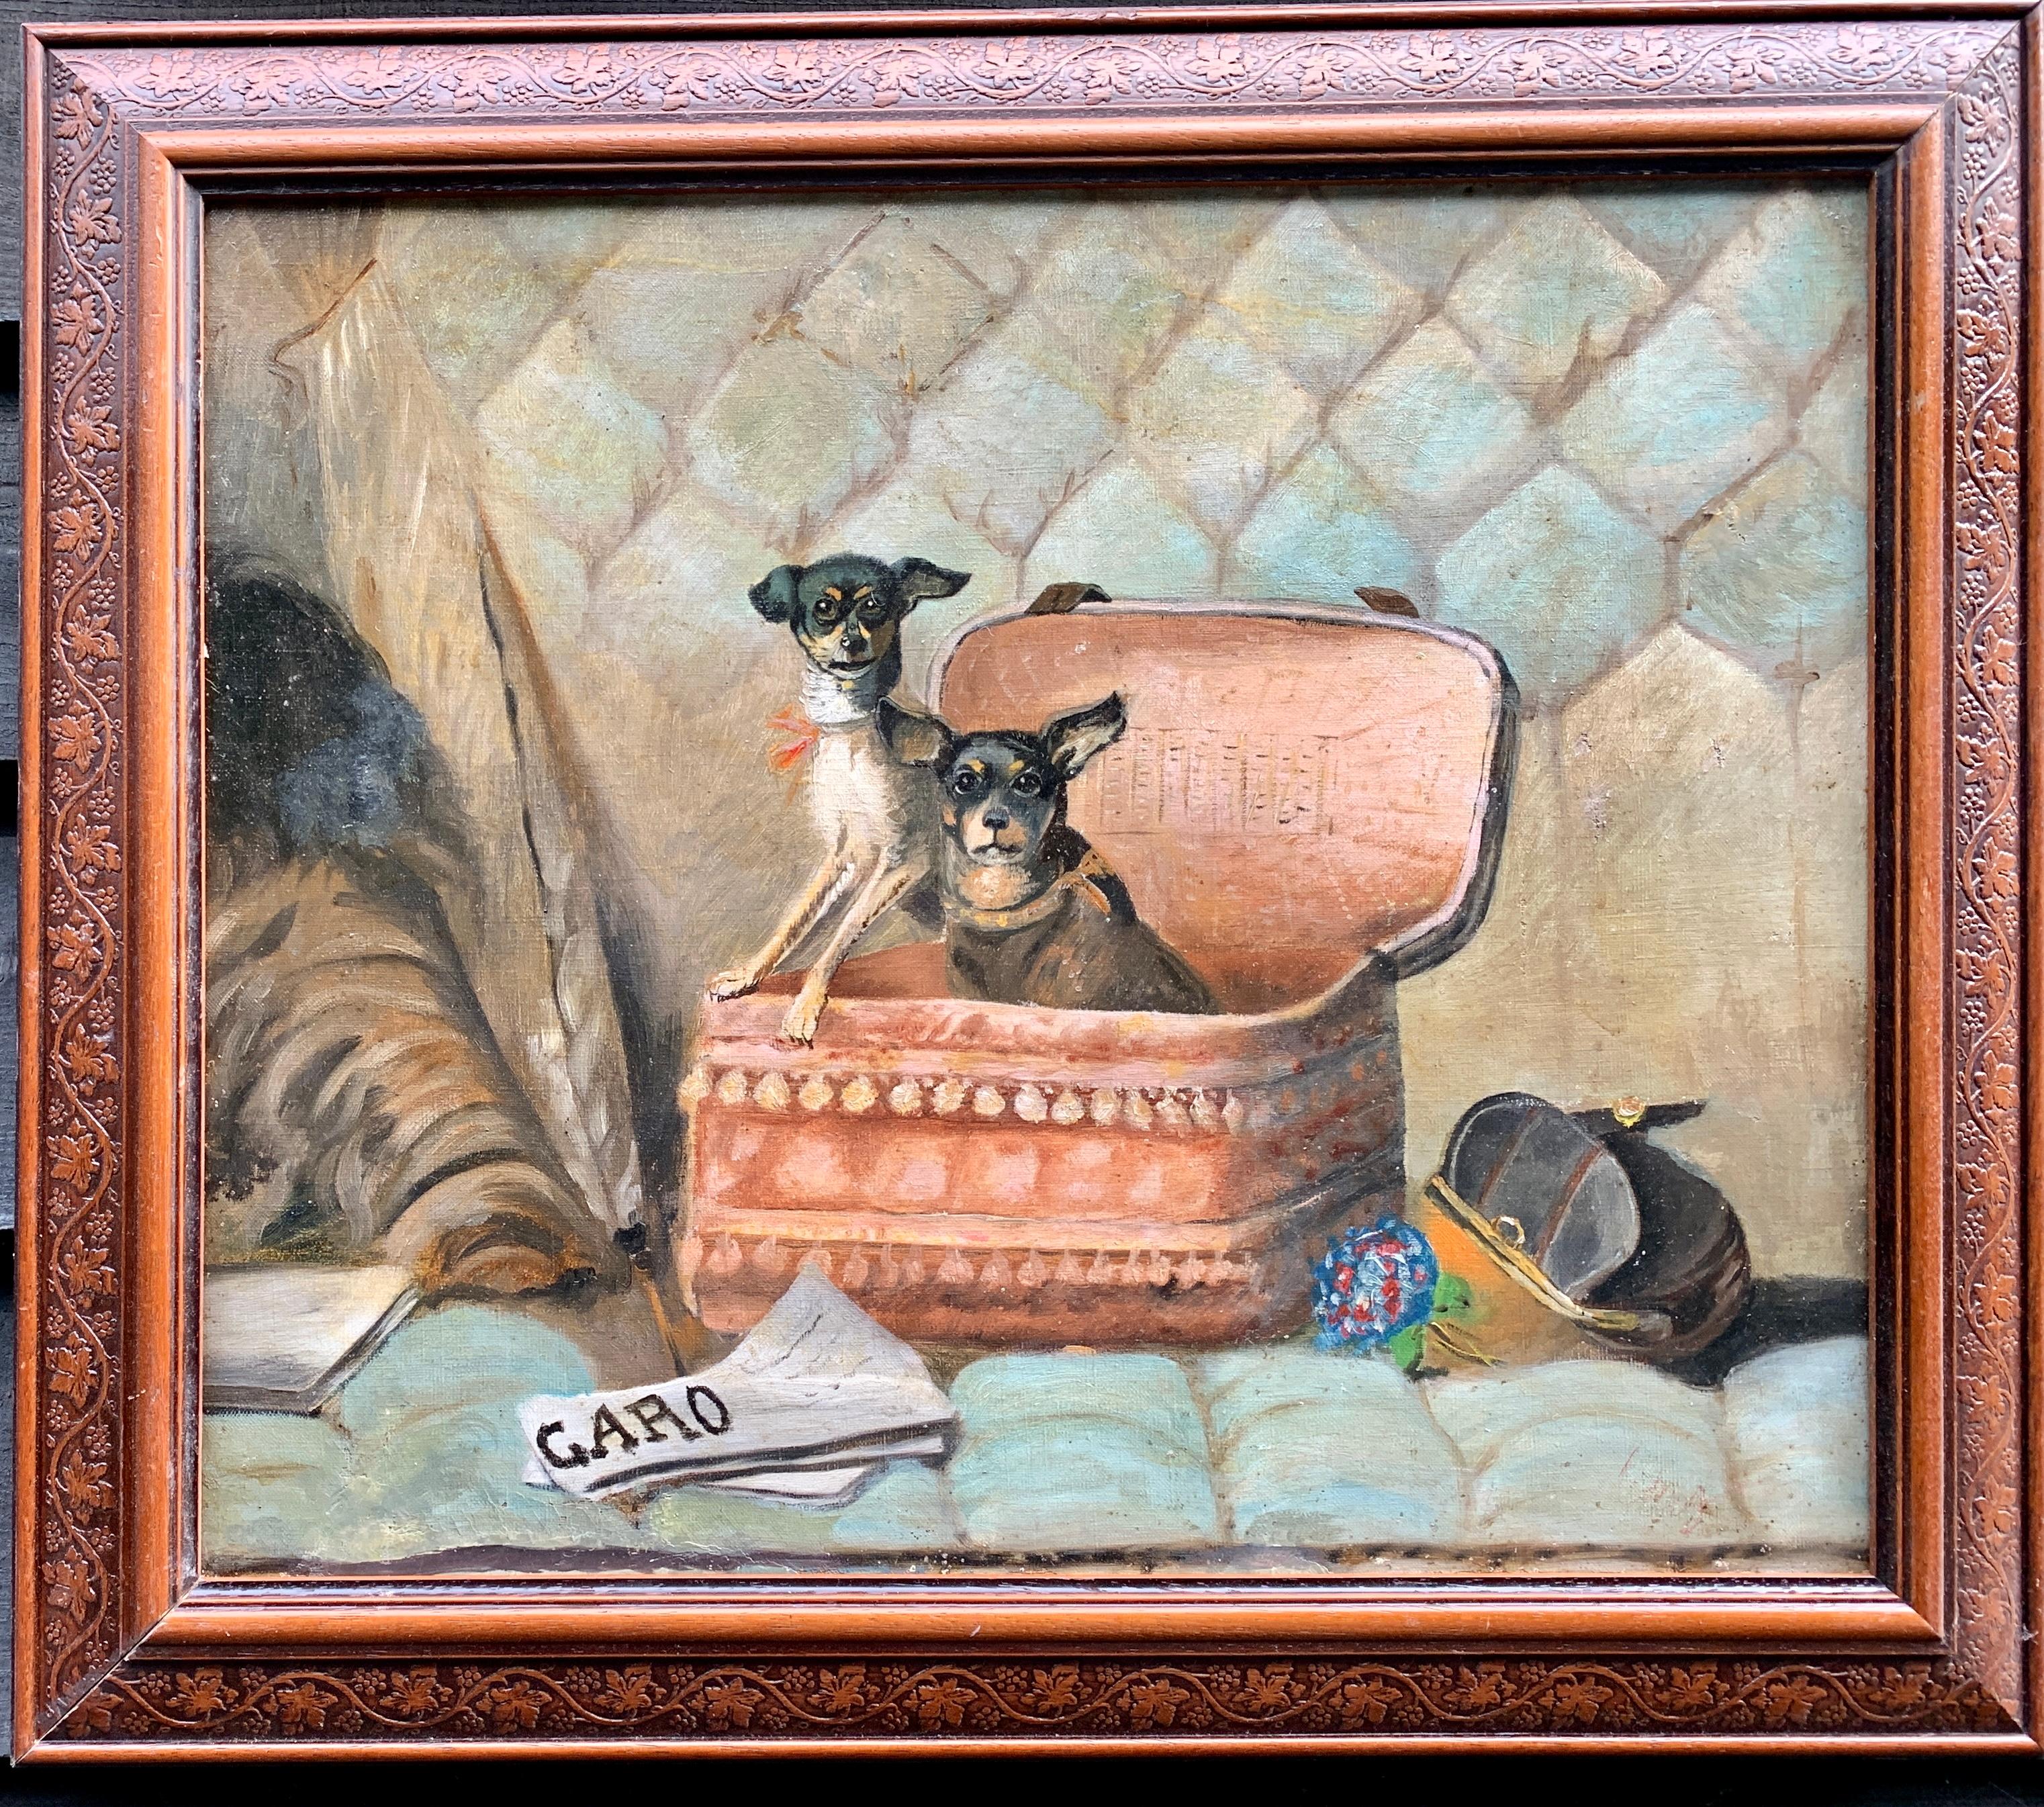 19th century French School Interior Painting - 19th century Antique French school portrait of two dogs playing in a box